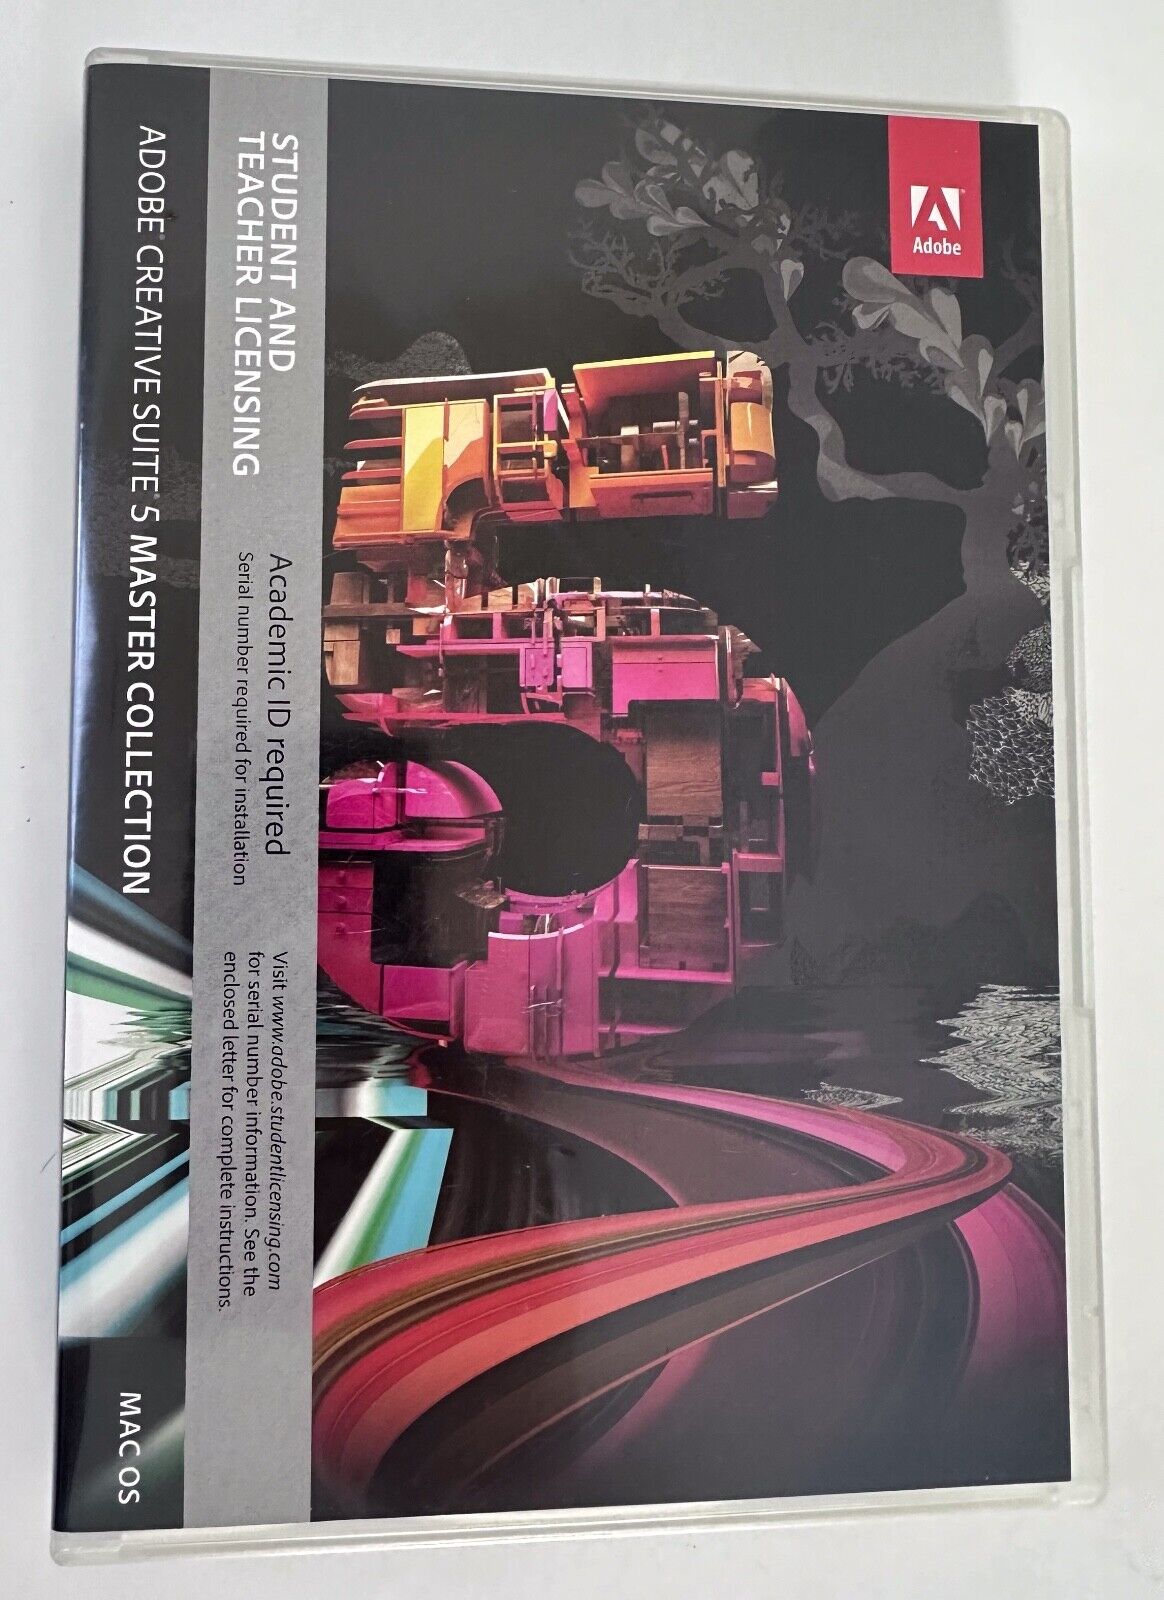 Adobe Creative Suite 5 Master Collection - Eduction / Student / Teacher  -Mac OS